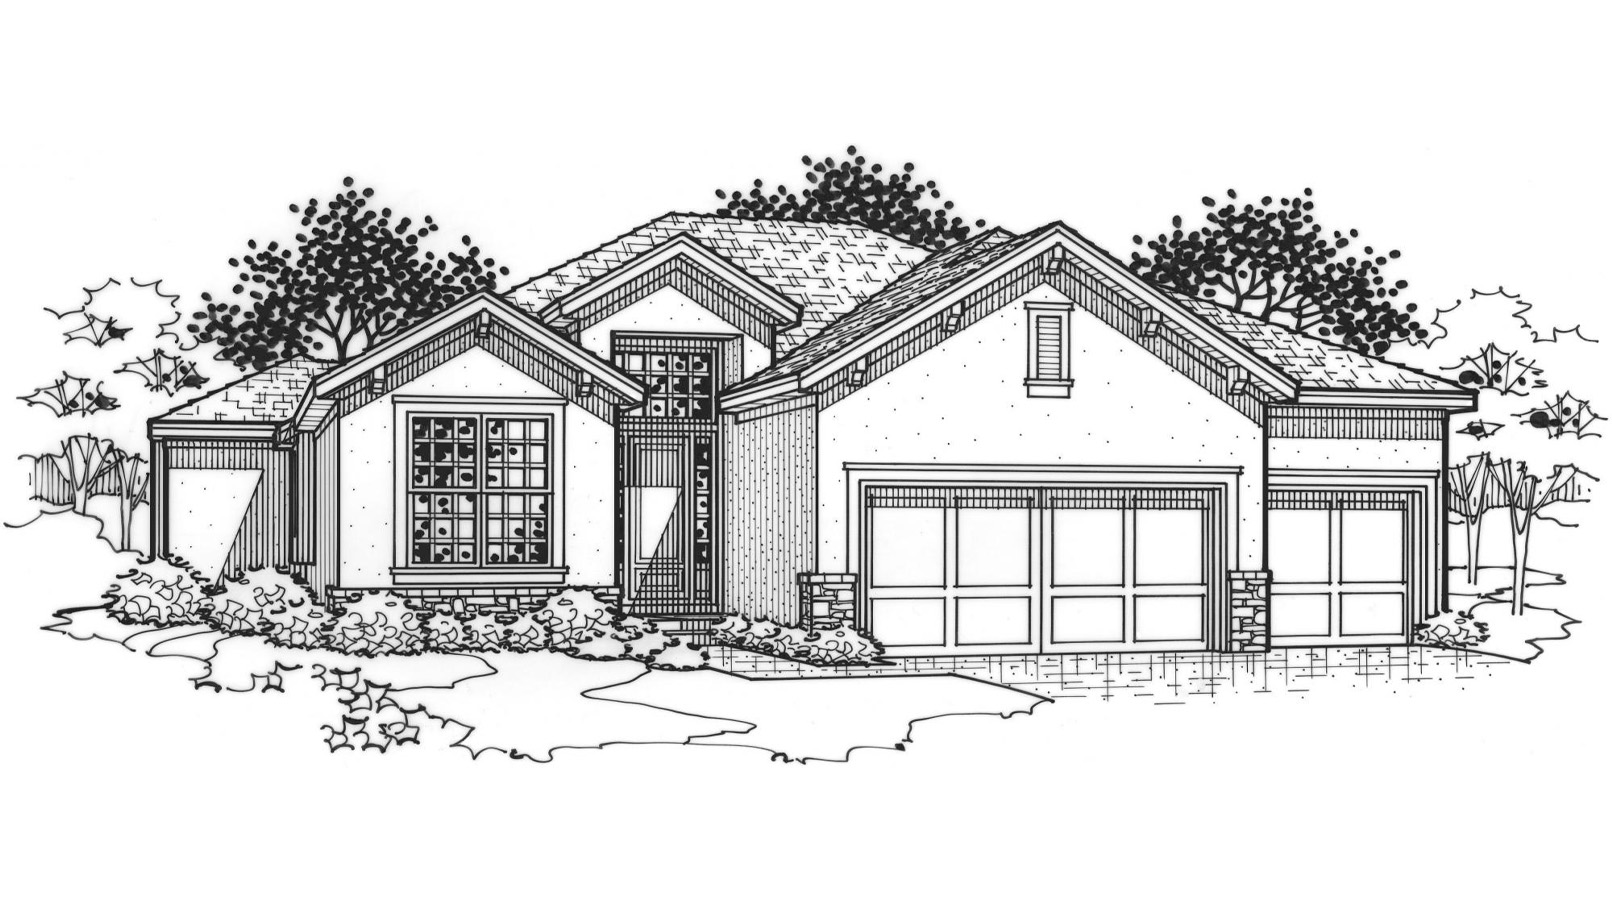 Black and white front elevation of the Norway model from Lambie Homes